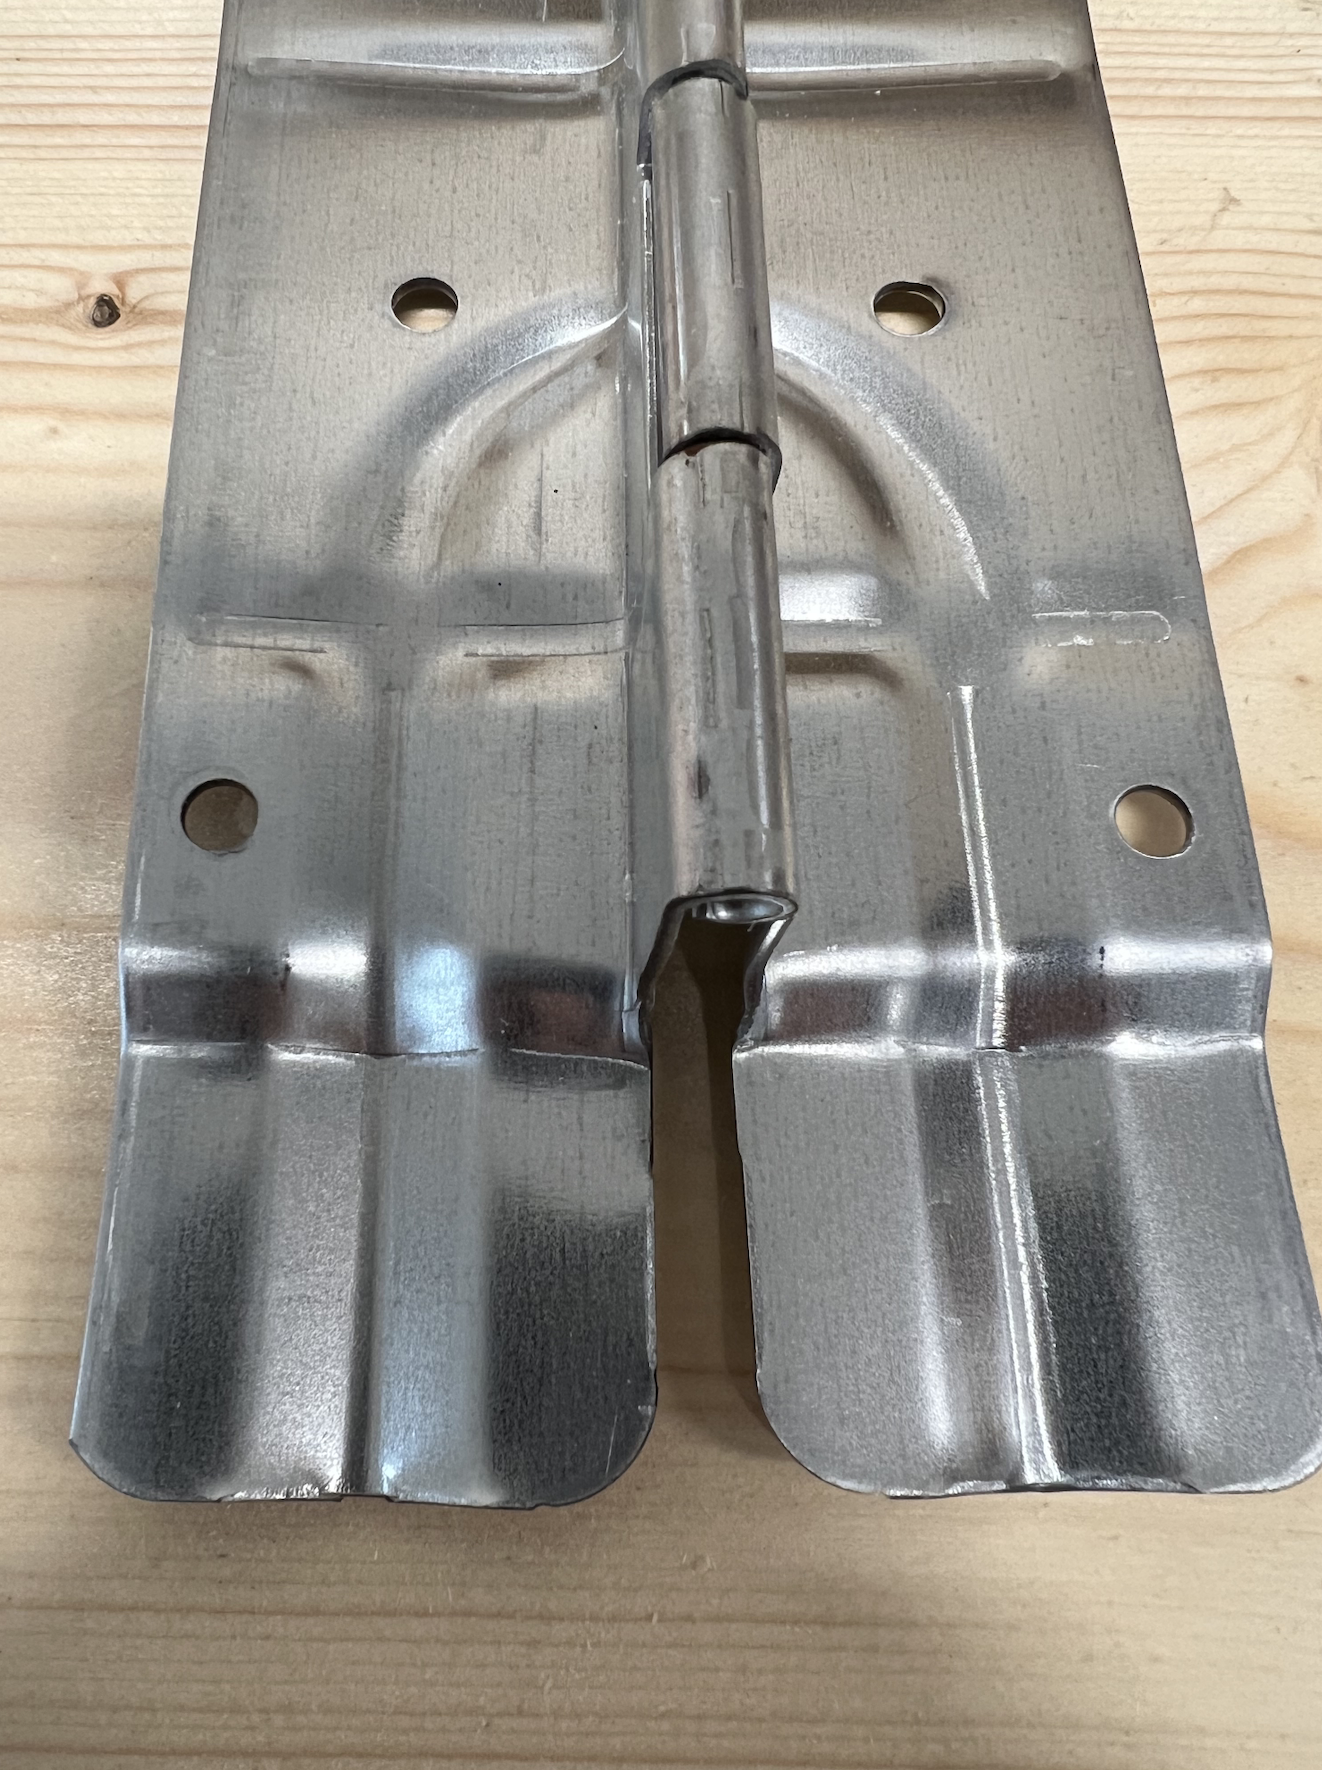 buy metal pallet collar hinges for sale online in canada with direct to consumer fast free shipping in Canada and low cost shipping around the world